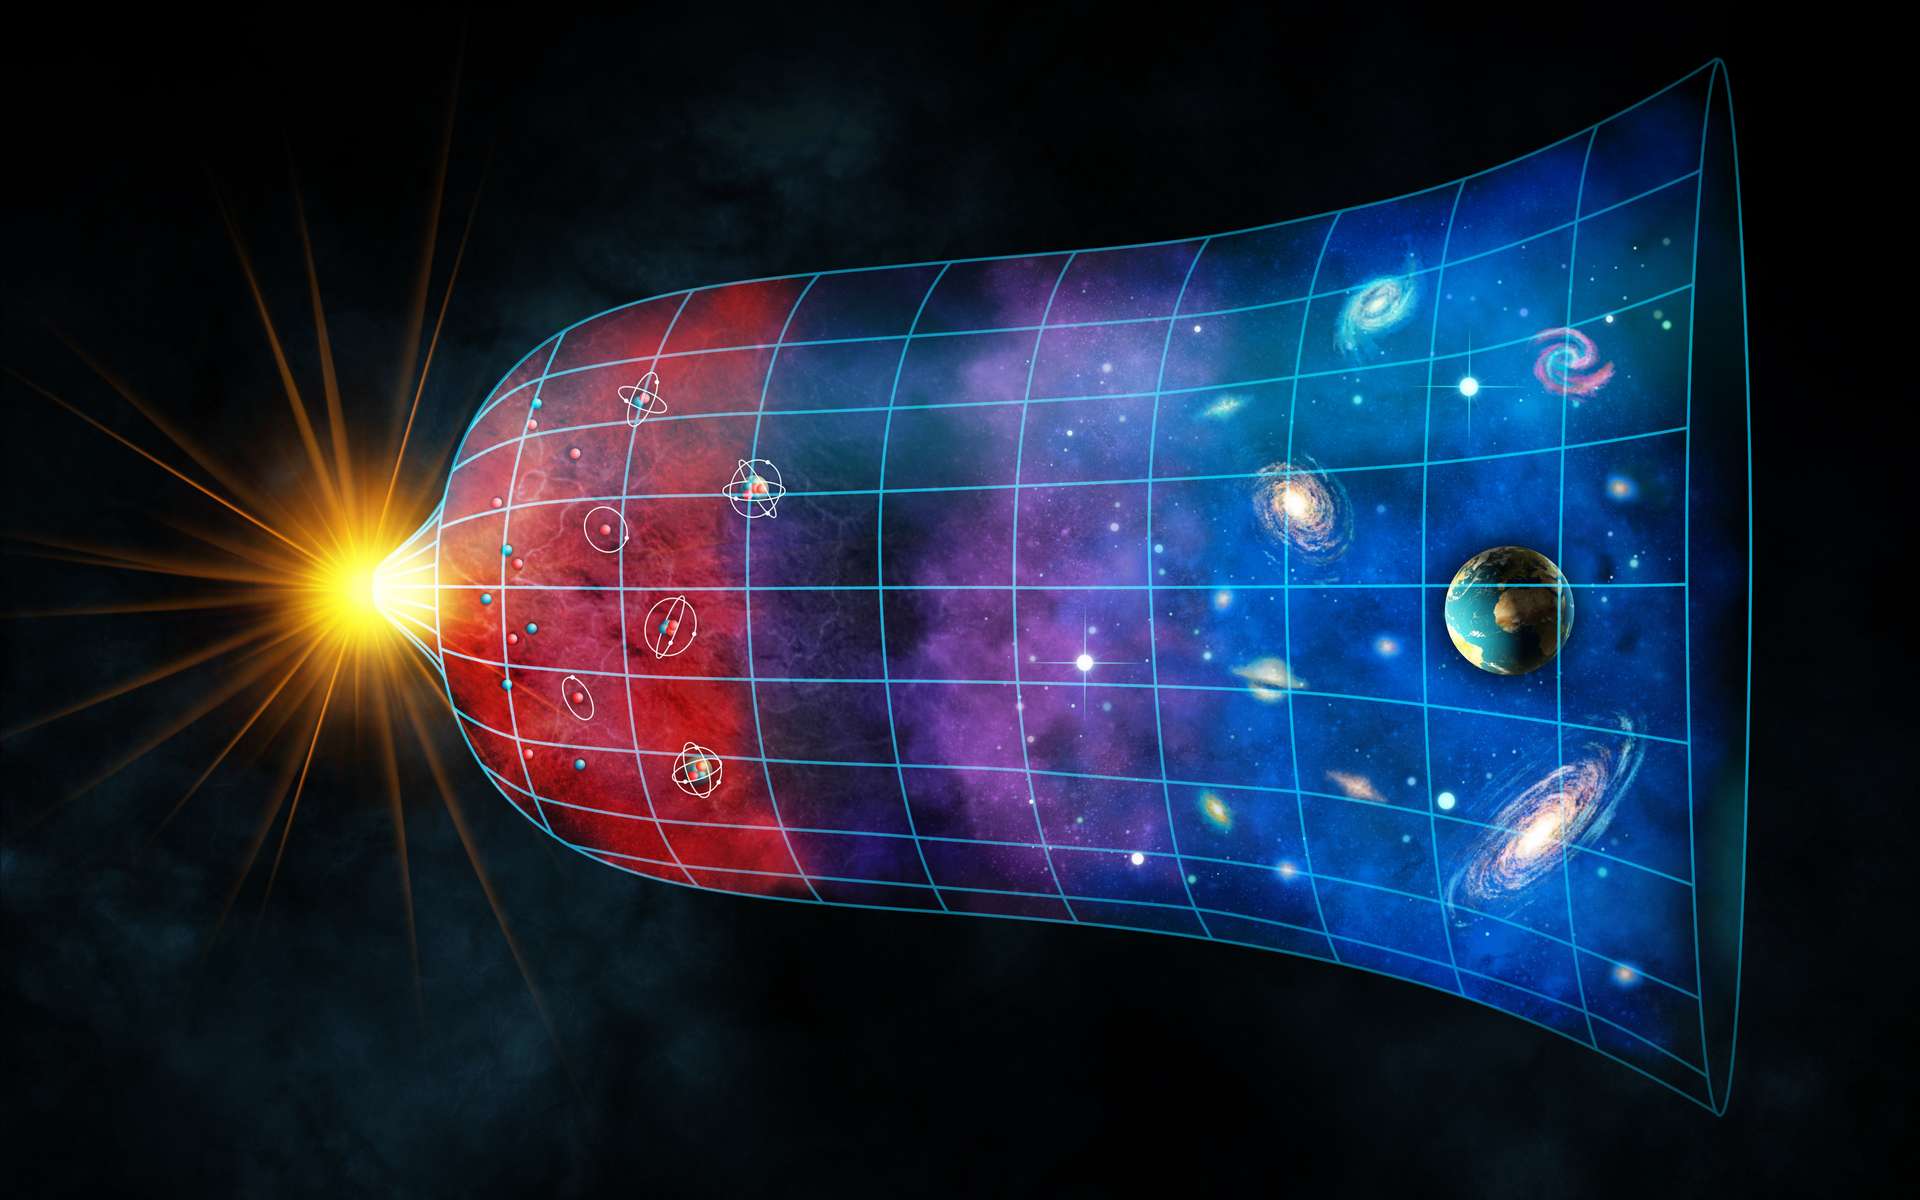 The end of the expansion of the universe will soon be